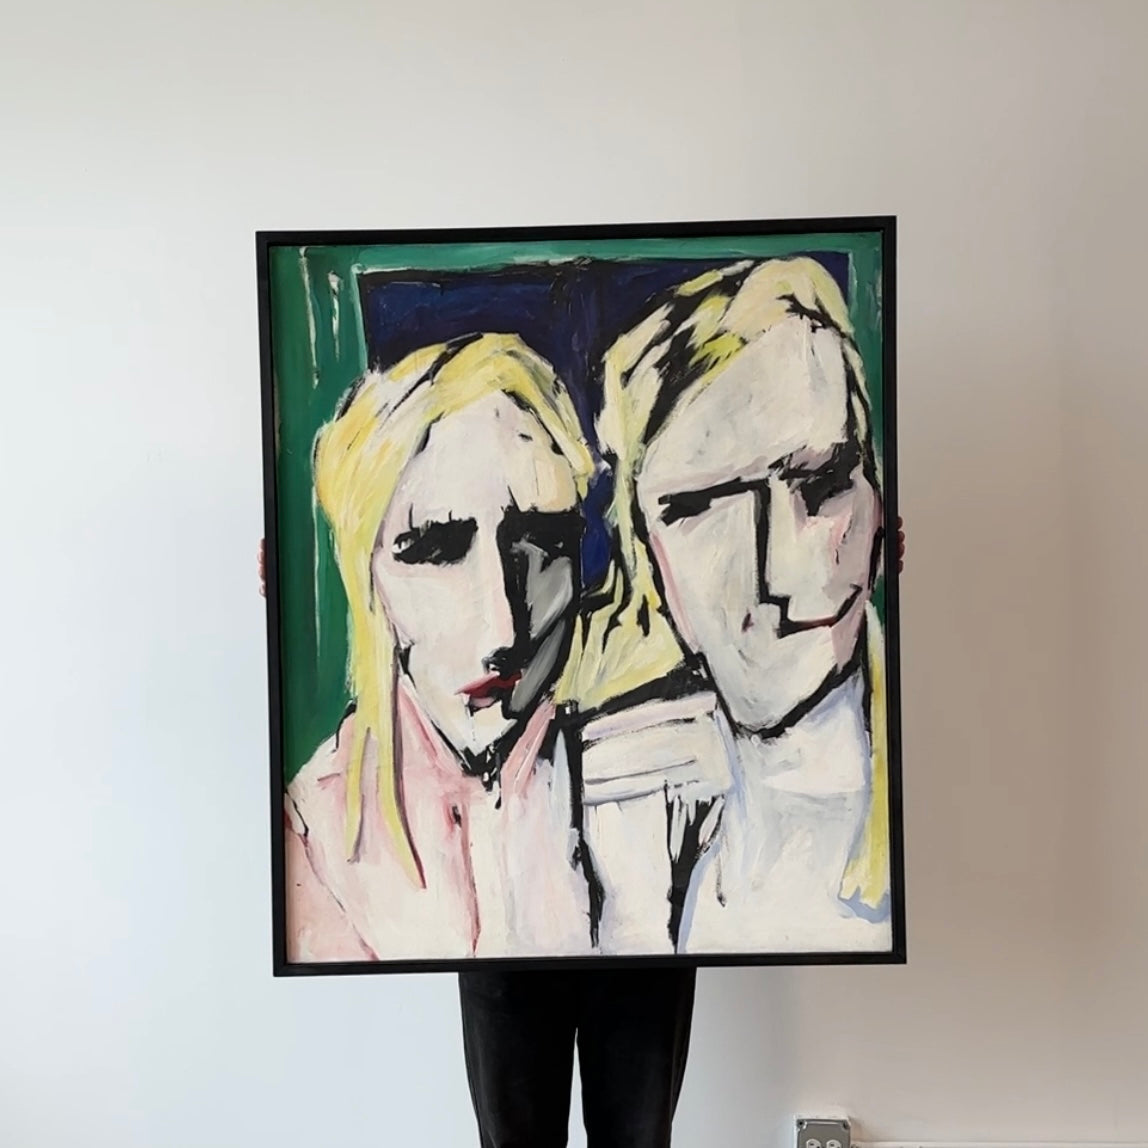 Painting of Two Blondes